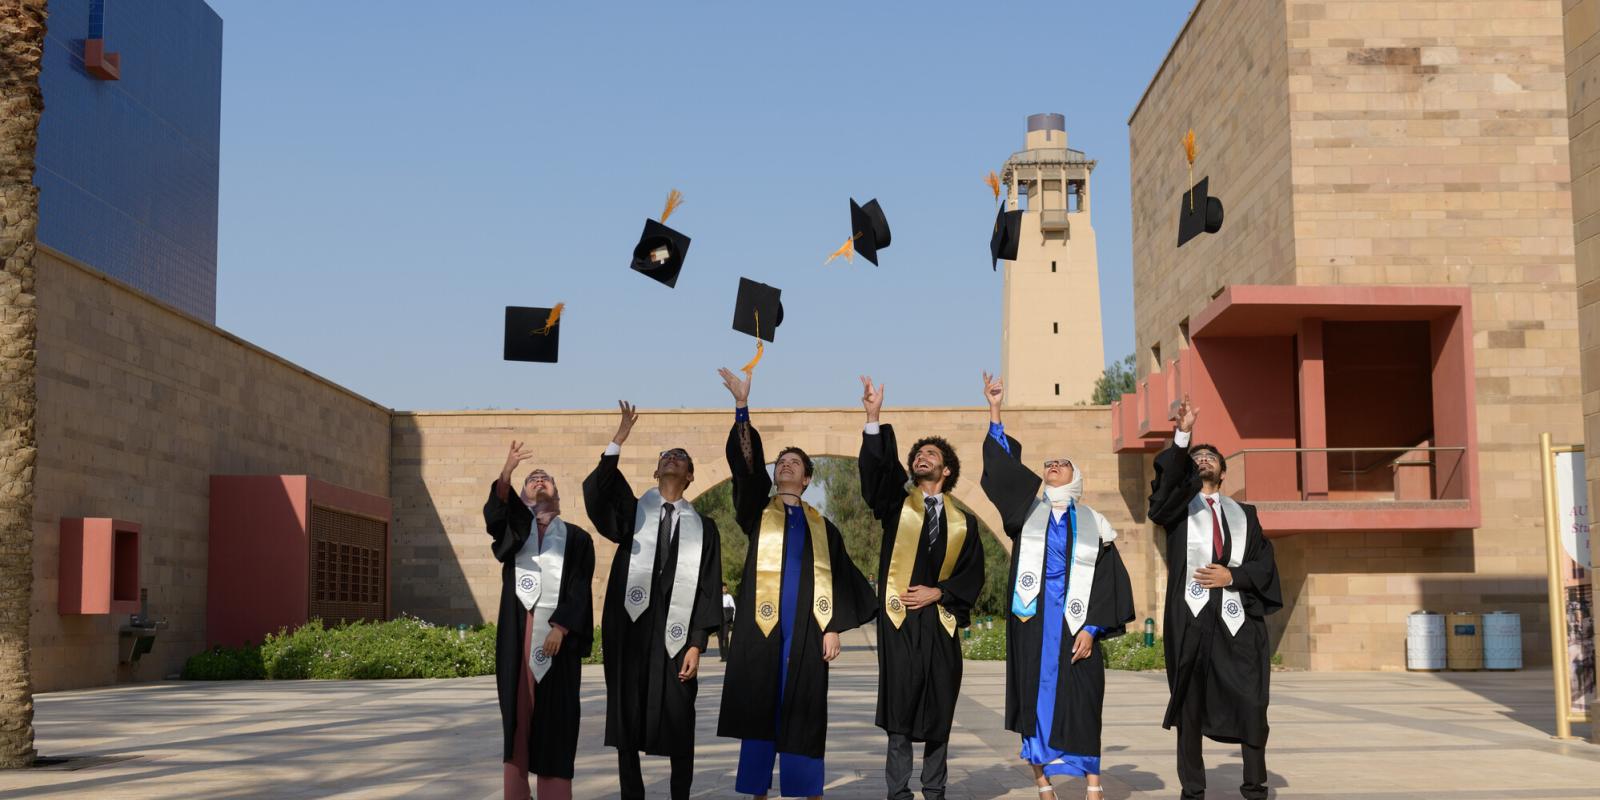 A group of students wearing gowns and throwing their cap in the air on AUC campus